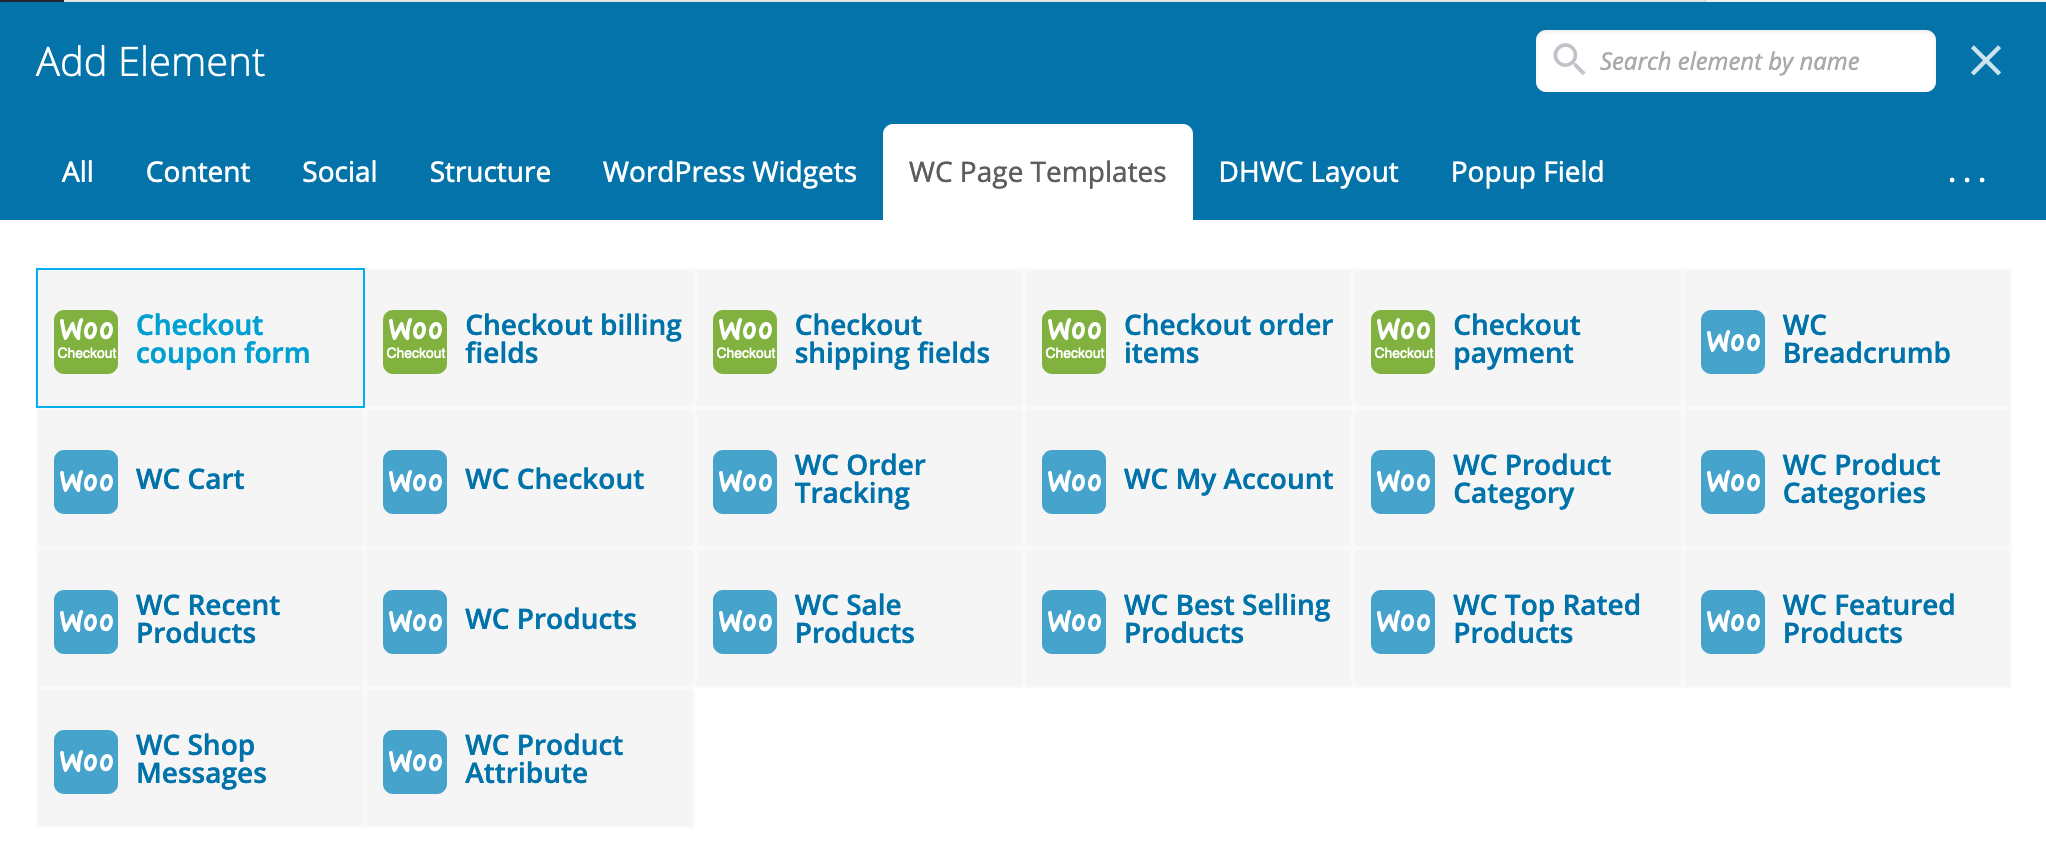 DHWCPage - WooCommerce Page Template Builder - 5